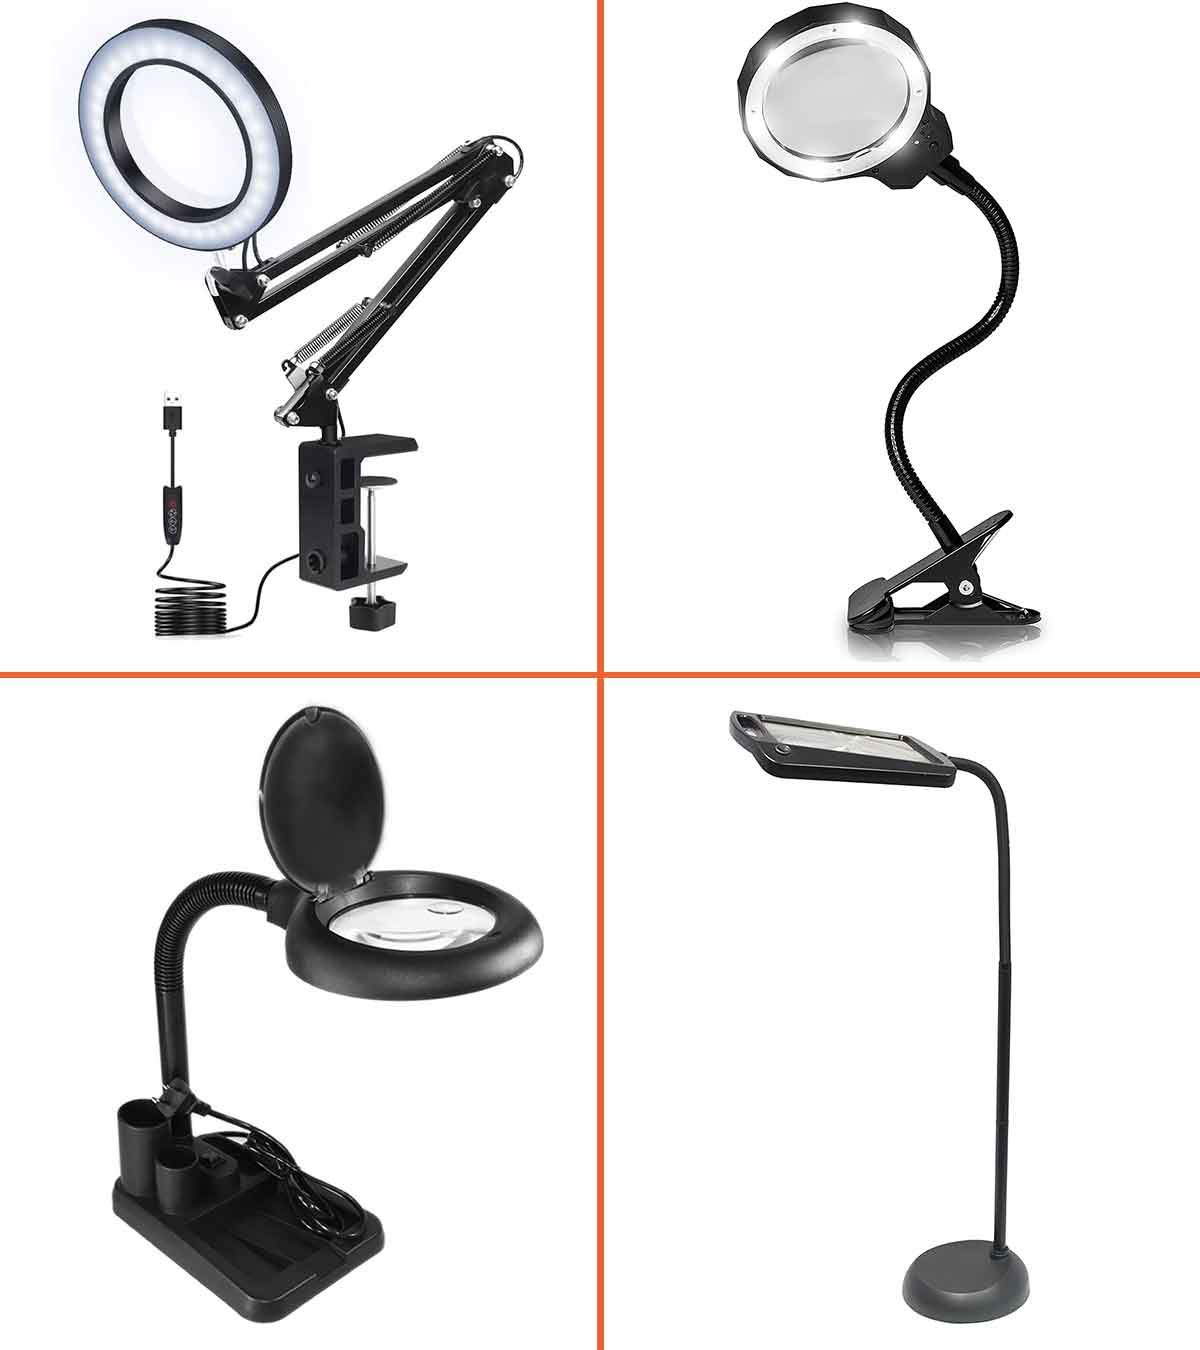 11 Best Magnifying Lamps: Reviews and Buying Guide For 2023